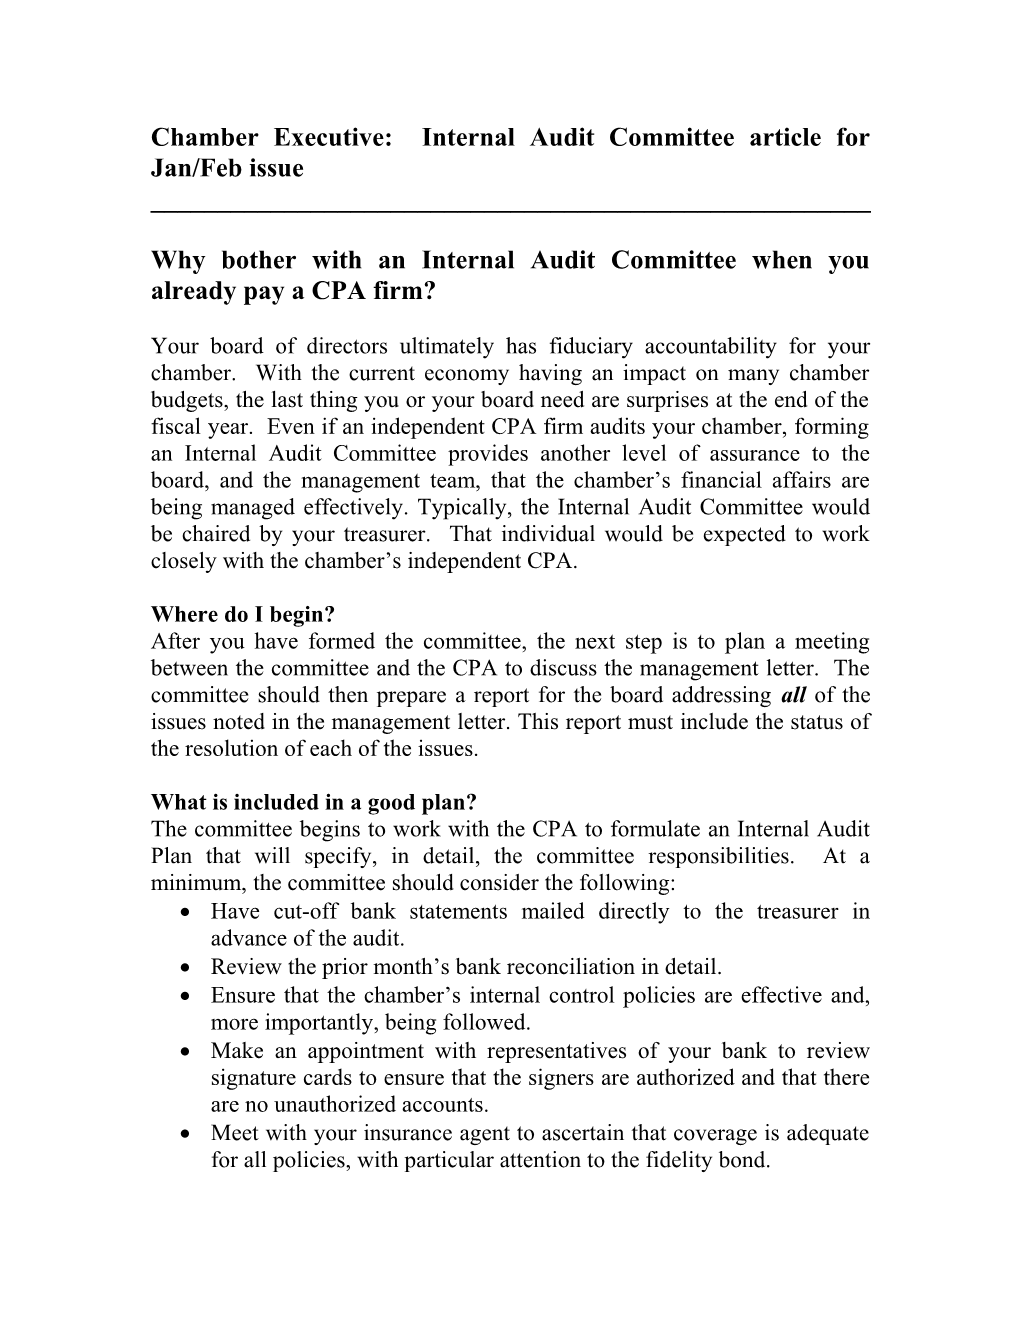 The Role of the Internal Audit Committee